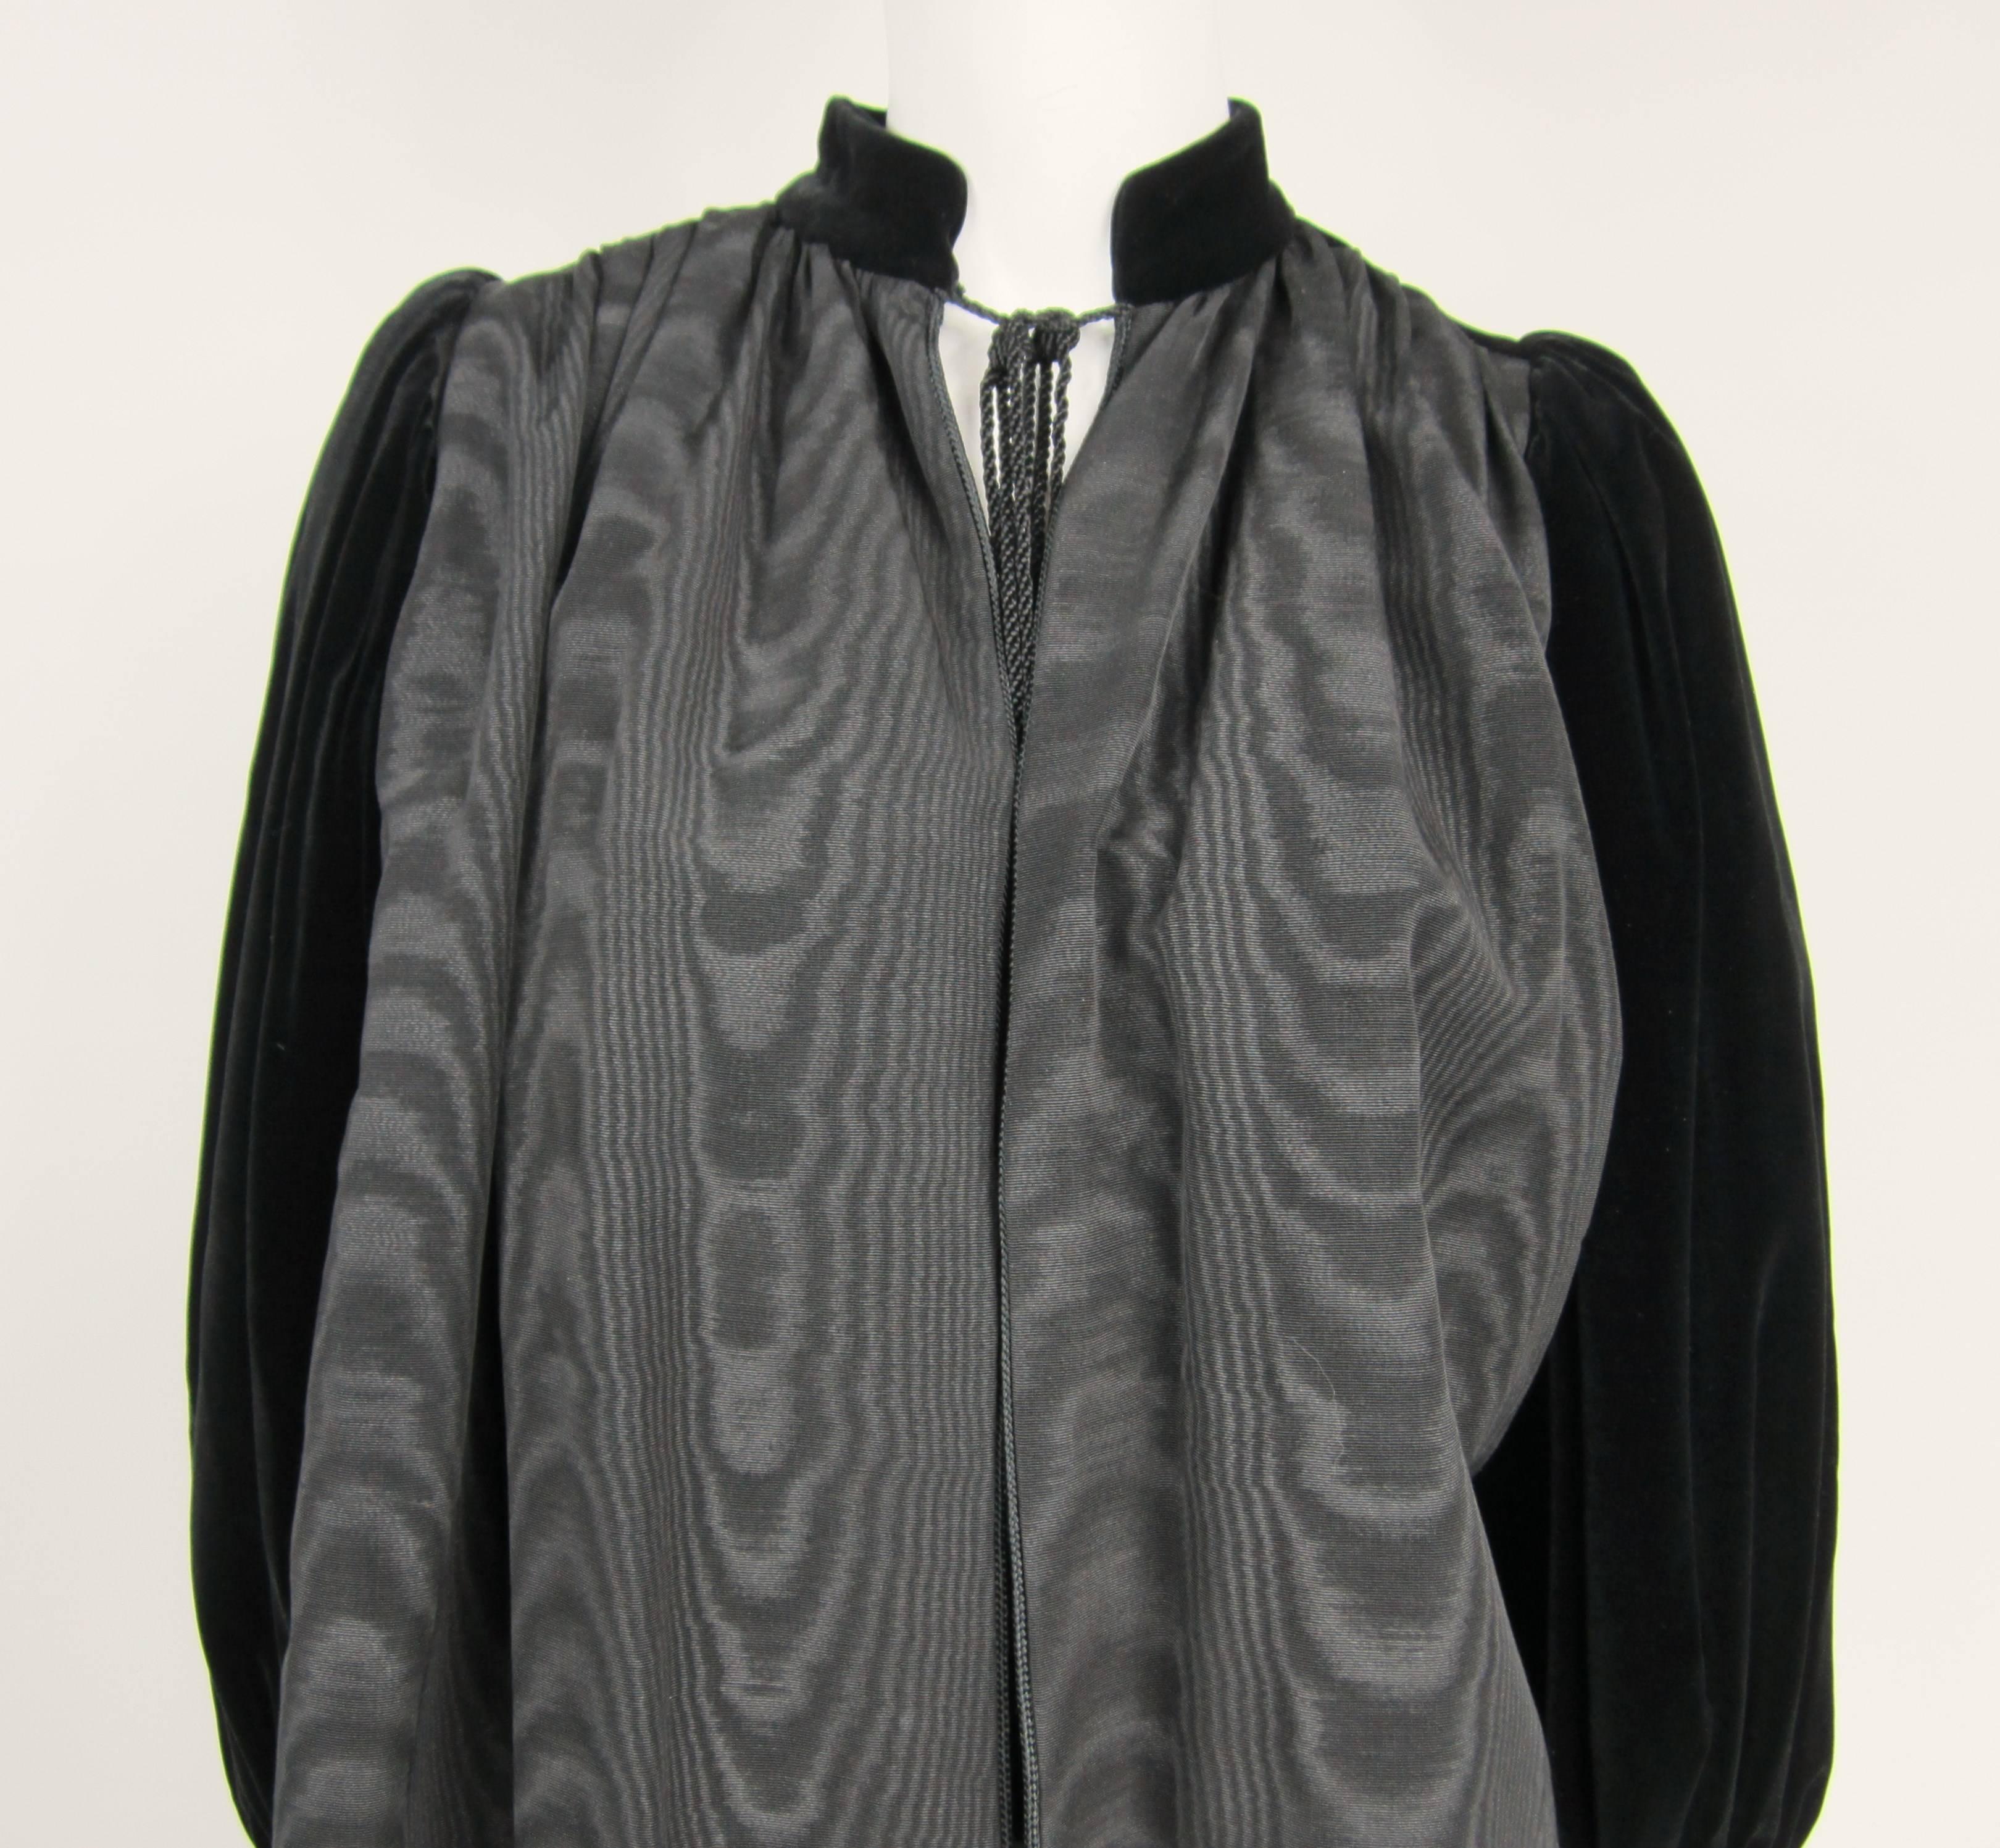 This is a stunning Yves Saint Laurent YSL black on black Velvet sleeved Jacket. Mandarin Collar with tassel cord closure. Balloon sleeves.. Banded cuff 2 slit hidden pockets. Labeled a Size 34 Measuring approximate up to a 42 chest -- Open waist --